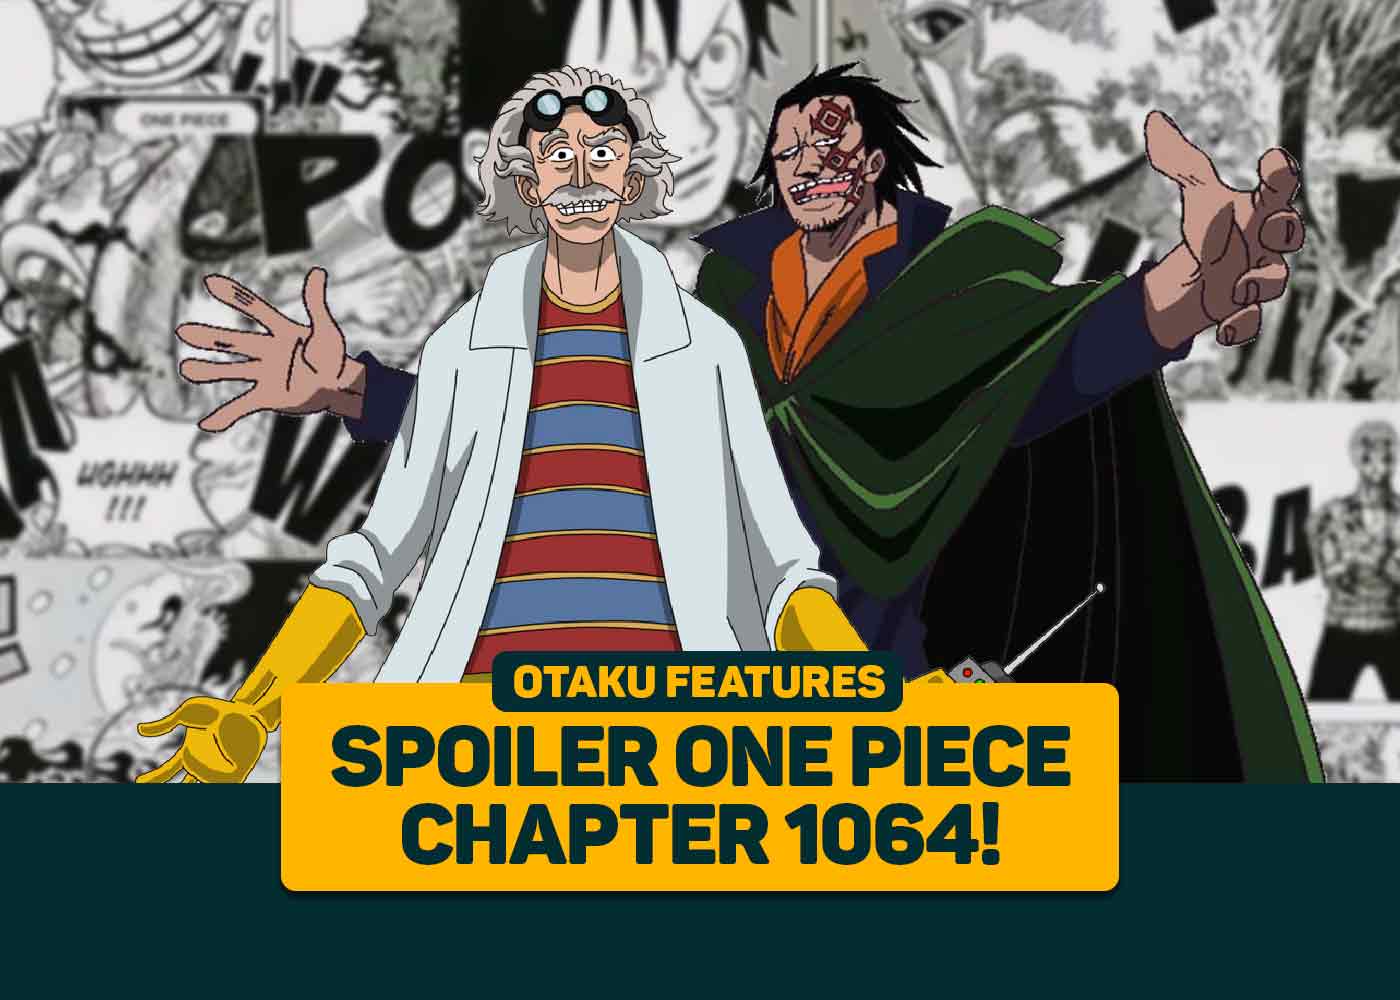 One Piece Chapter 1061 spoilers shine the spotlight on Vegapunk